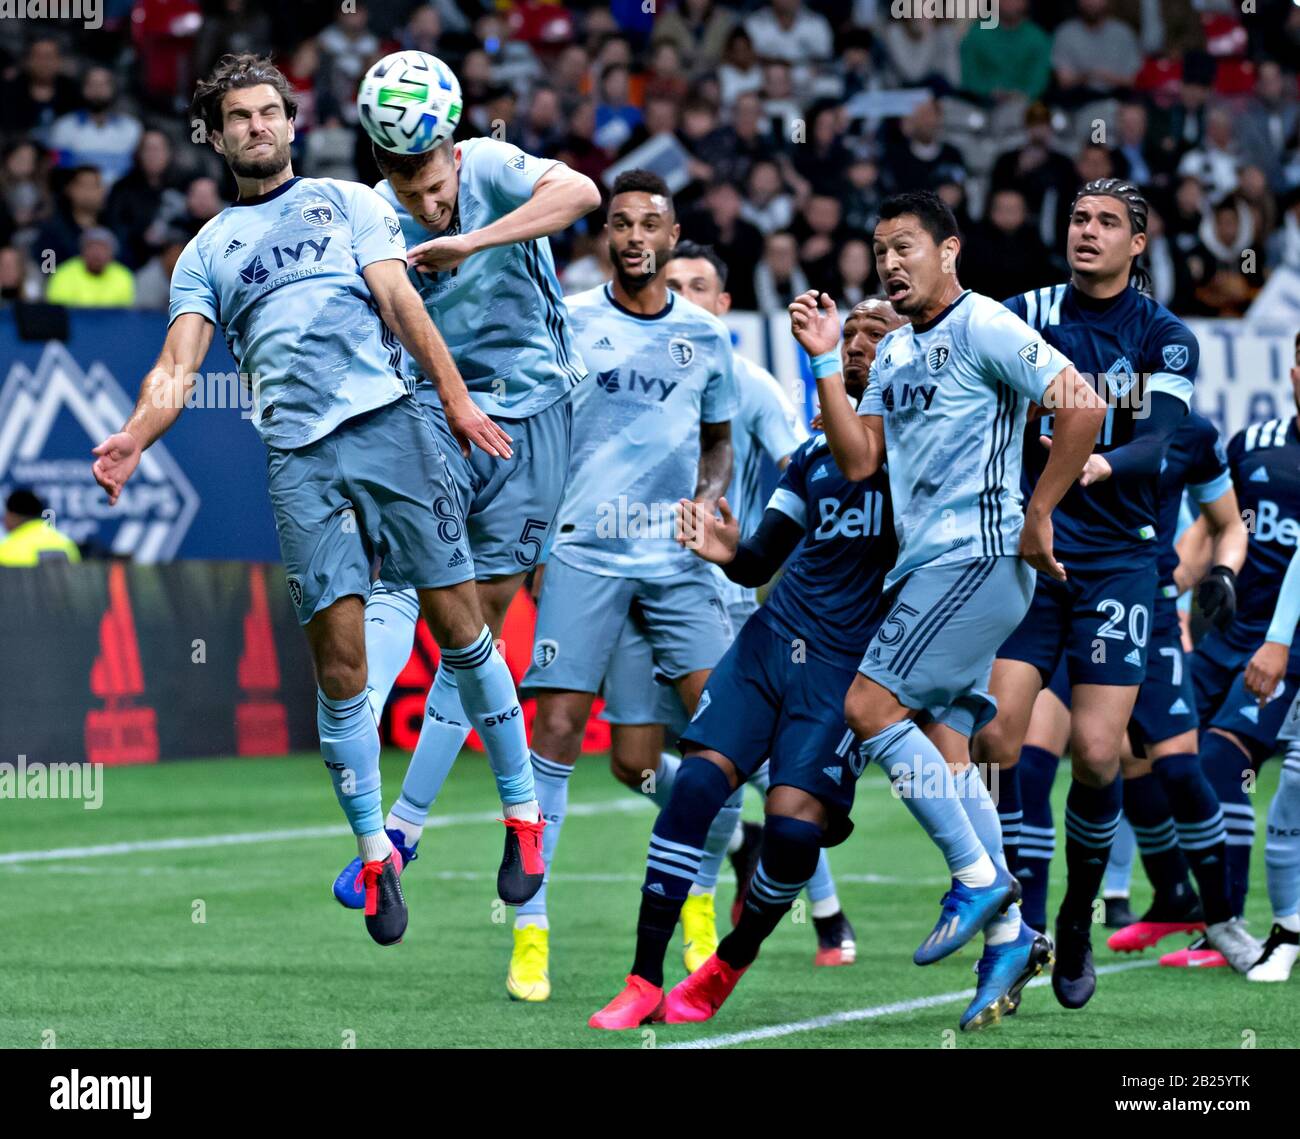 Vancouver, Canada. 29th Feb, 2020. Graham Zusi (1st L) of Sporting Kansas City heads the ball during a Major League Soccer regular season match between Sporting Kansas City and Vancouver Whitecups in Vancouver, Canada, on Feb. 29, 2020. Credit: Andrew Soong/Xinhua/Alamy Live News Stock Photo